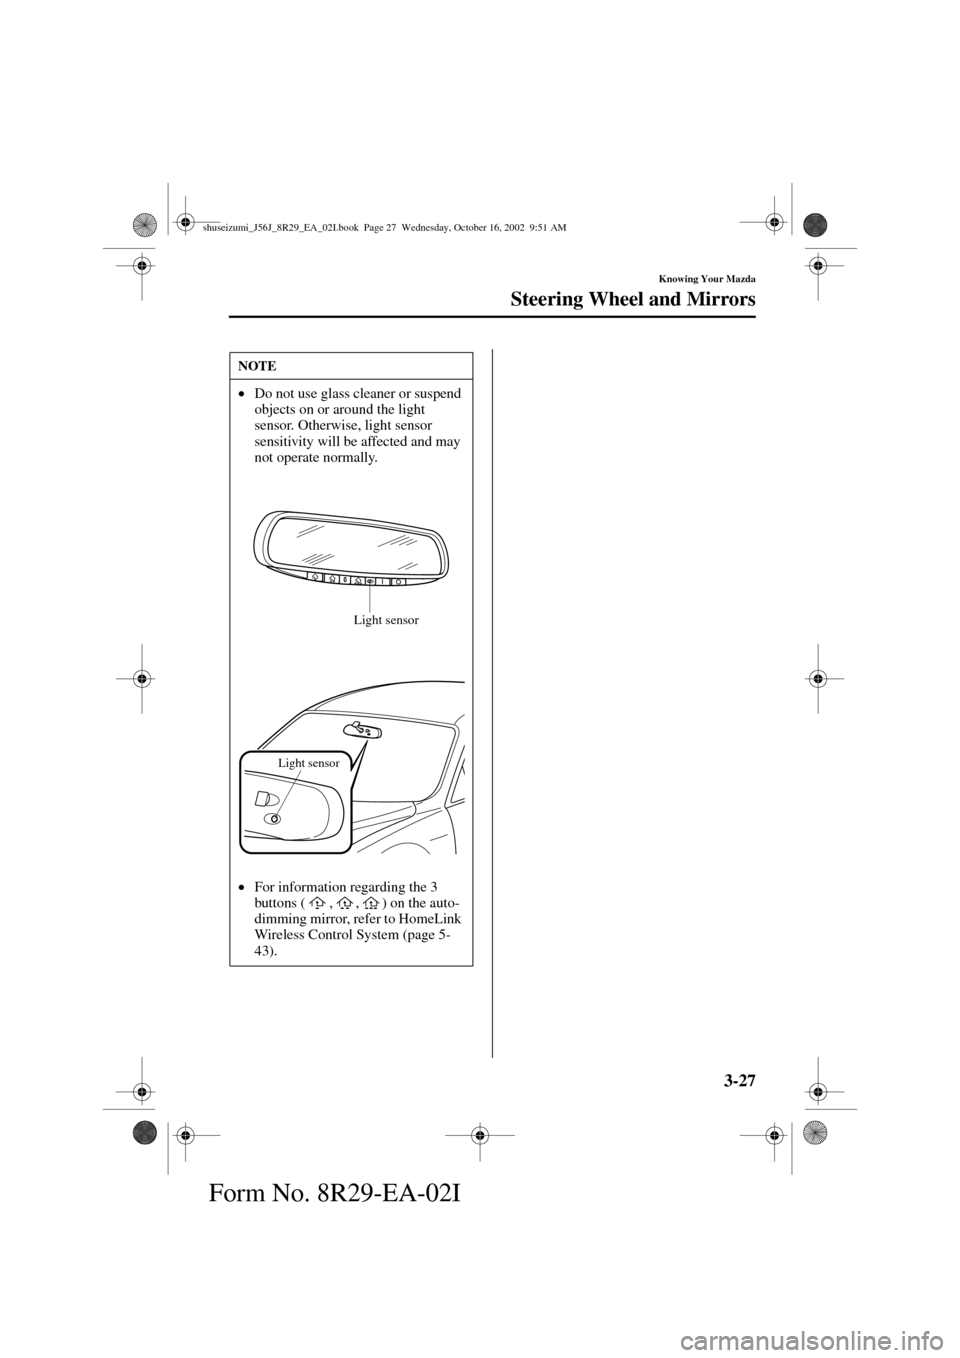 MAZDA MODEL 6 2003  Owners Manual (in English) 3-27
Knowing Your Mazda
Steering Wheel and Mirrors
Form No. 8R29-EA-02I
NOTE
•
Do not use glass cleaner or suspend 
objects on or around the light 
sensor. Otherwise, light sensor 
sensitivity will 